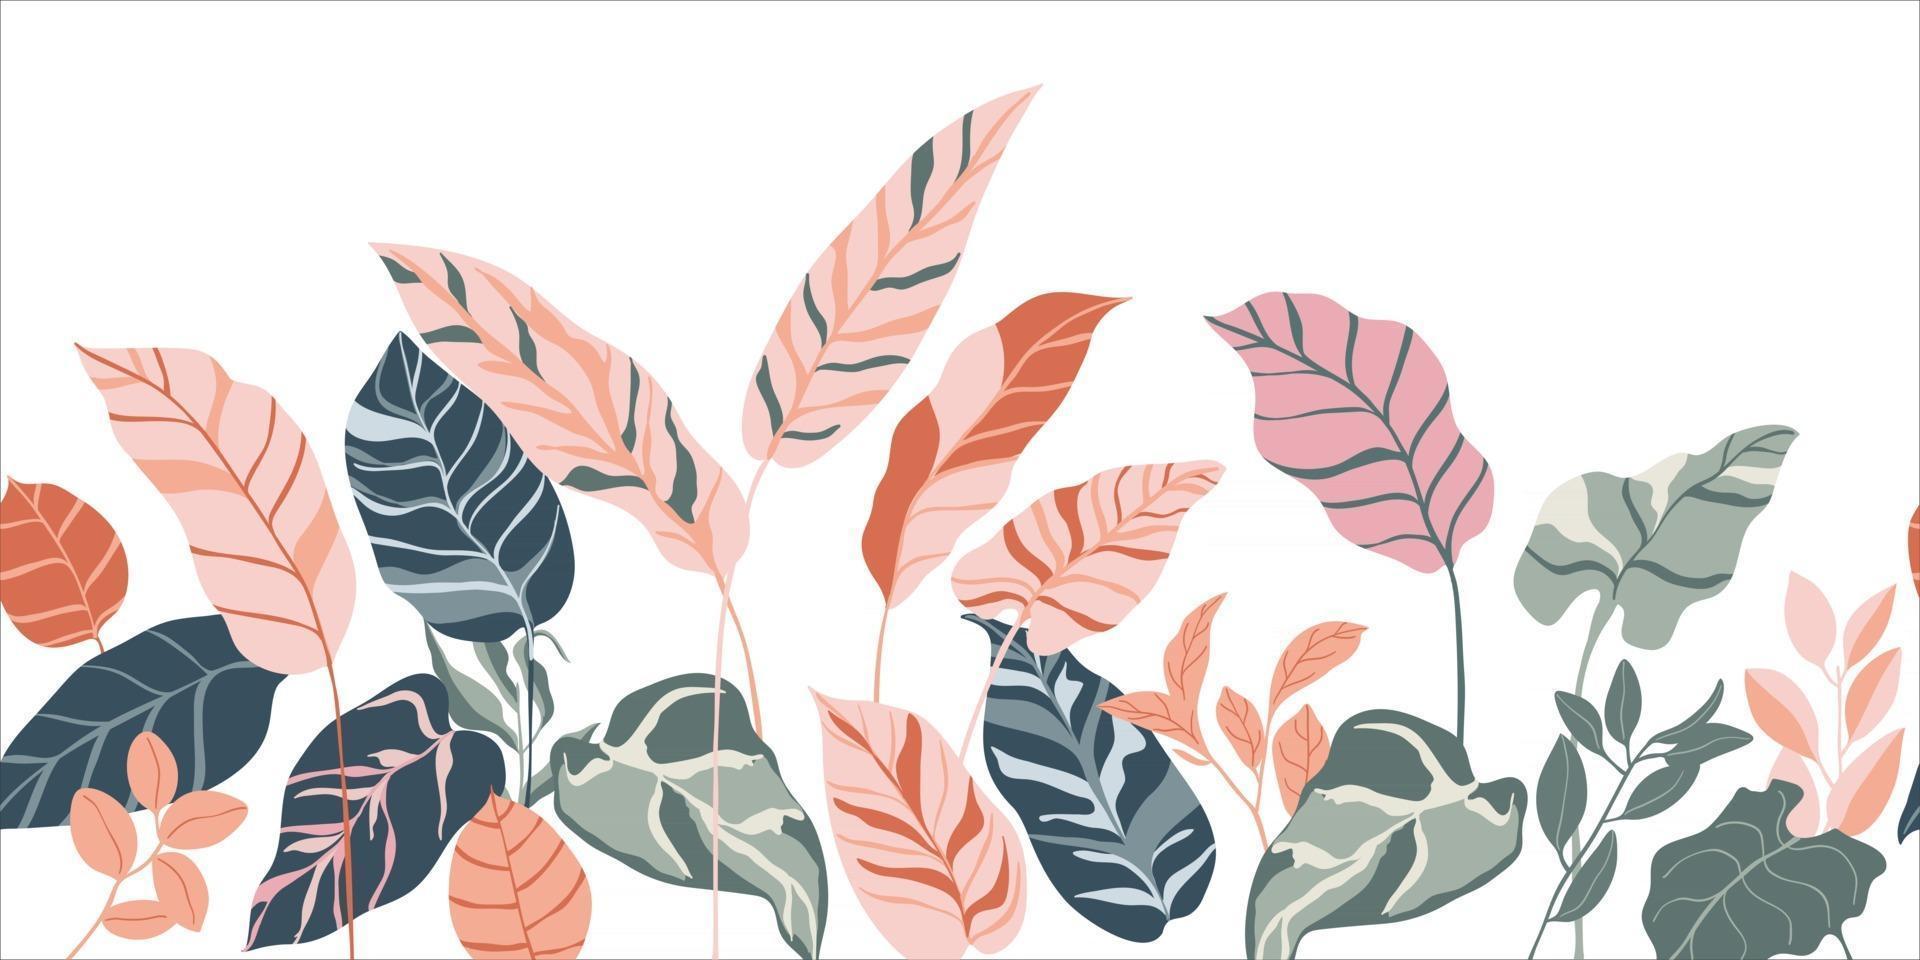 A colorful illustration of leaves in pink, blue, and green on a white background - Monstera